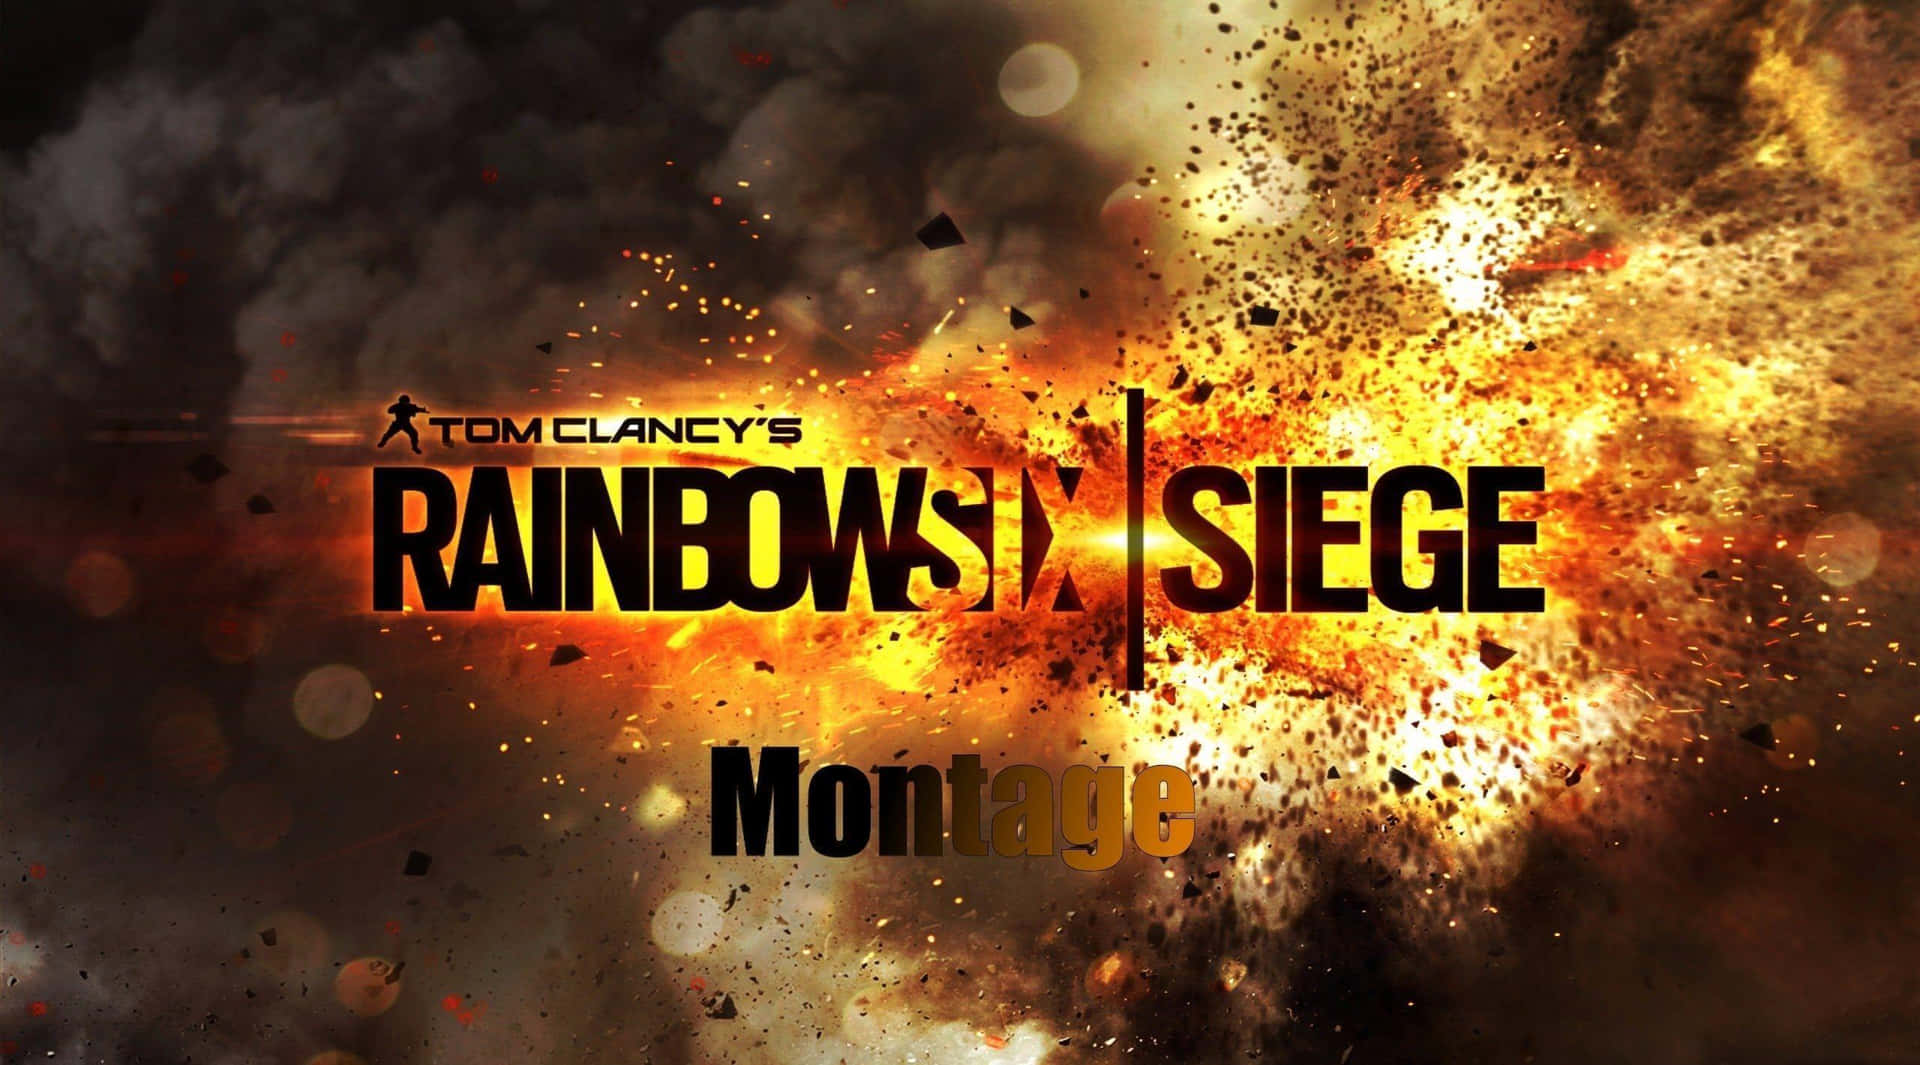 "Lead the Charge with Tom Clancy's Rainbow Six Siege" Wallpaper